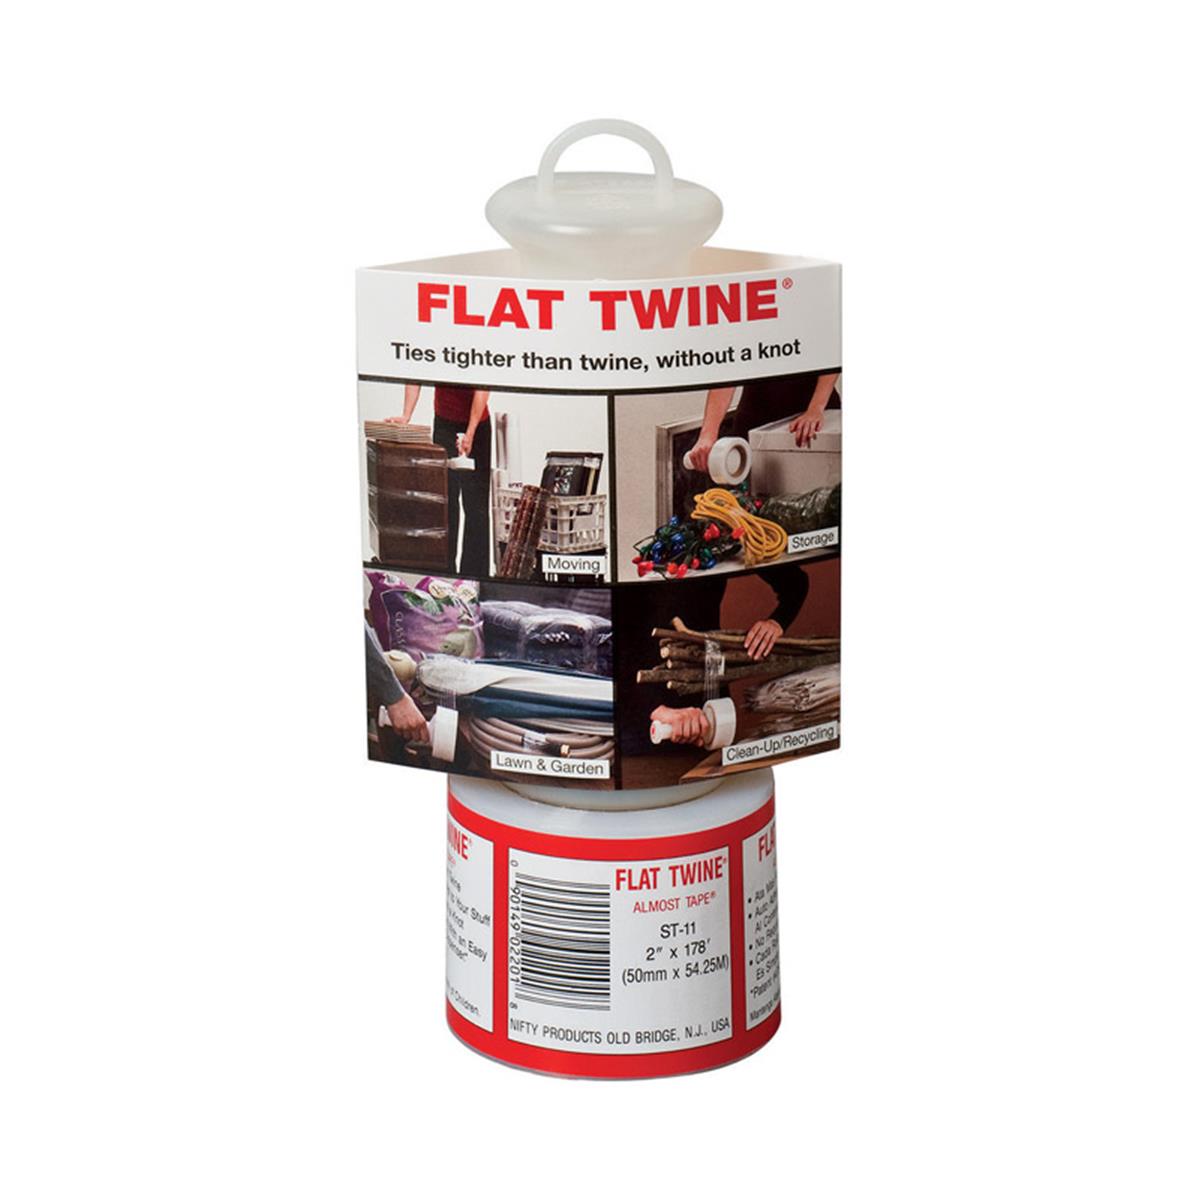 St-11 2 In. X 178 Ft. Twine Nifty Shrink Wrap